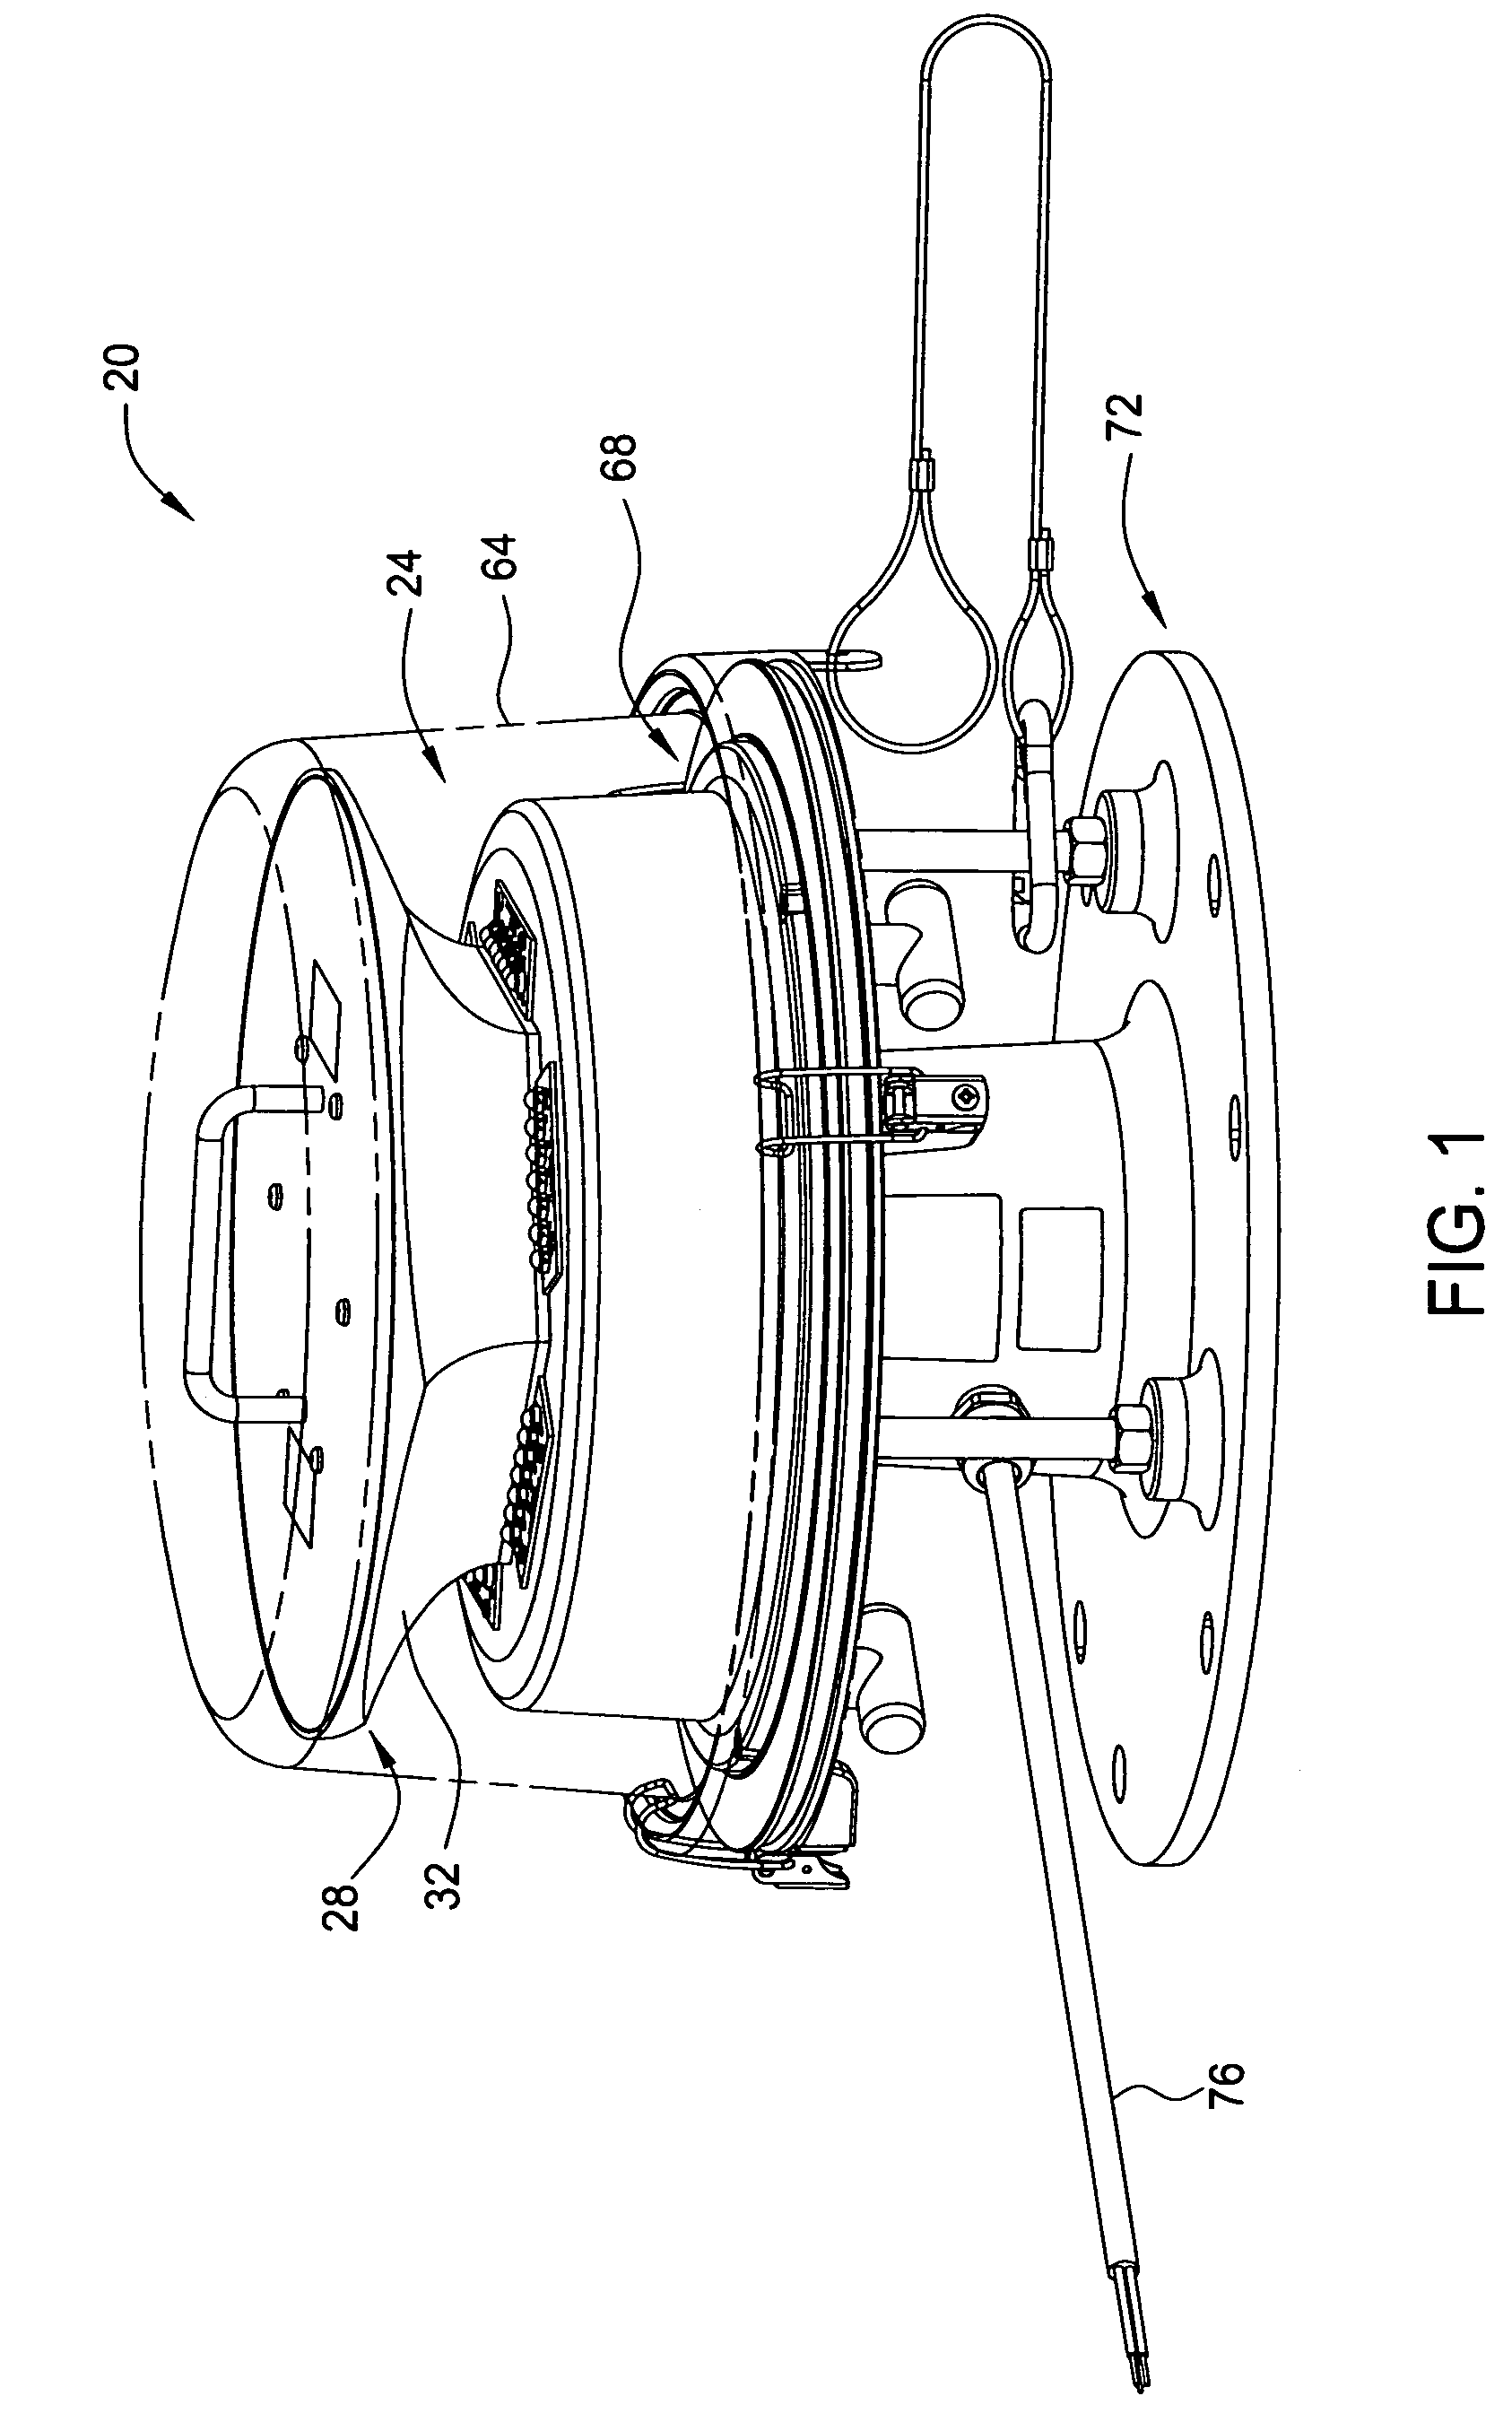 Beacon light with reflector and light-emitting diodes